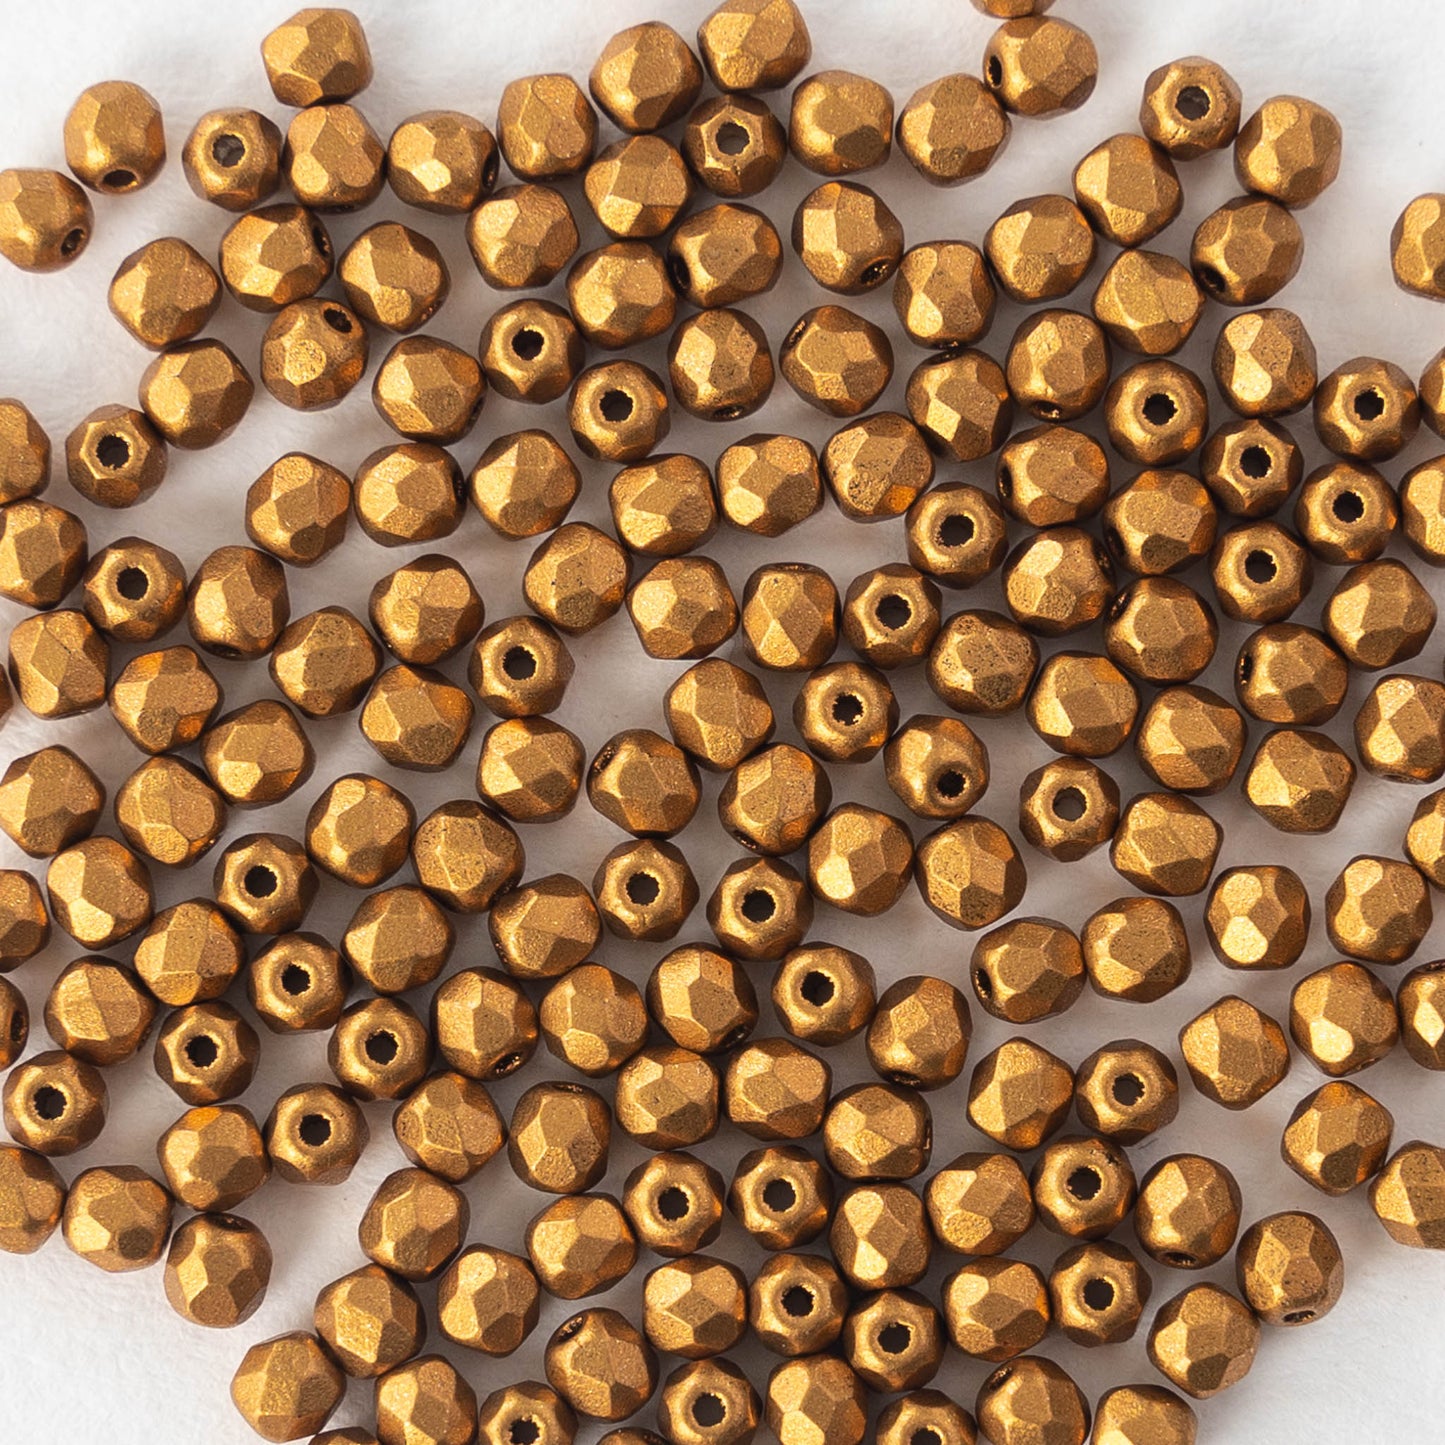 3mm Round Firepolished Beads - Antique Gold Matte - 5 Grams